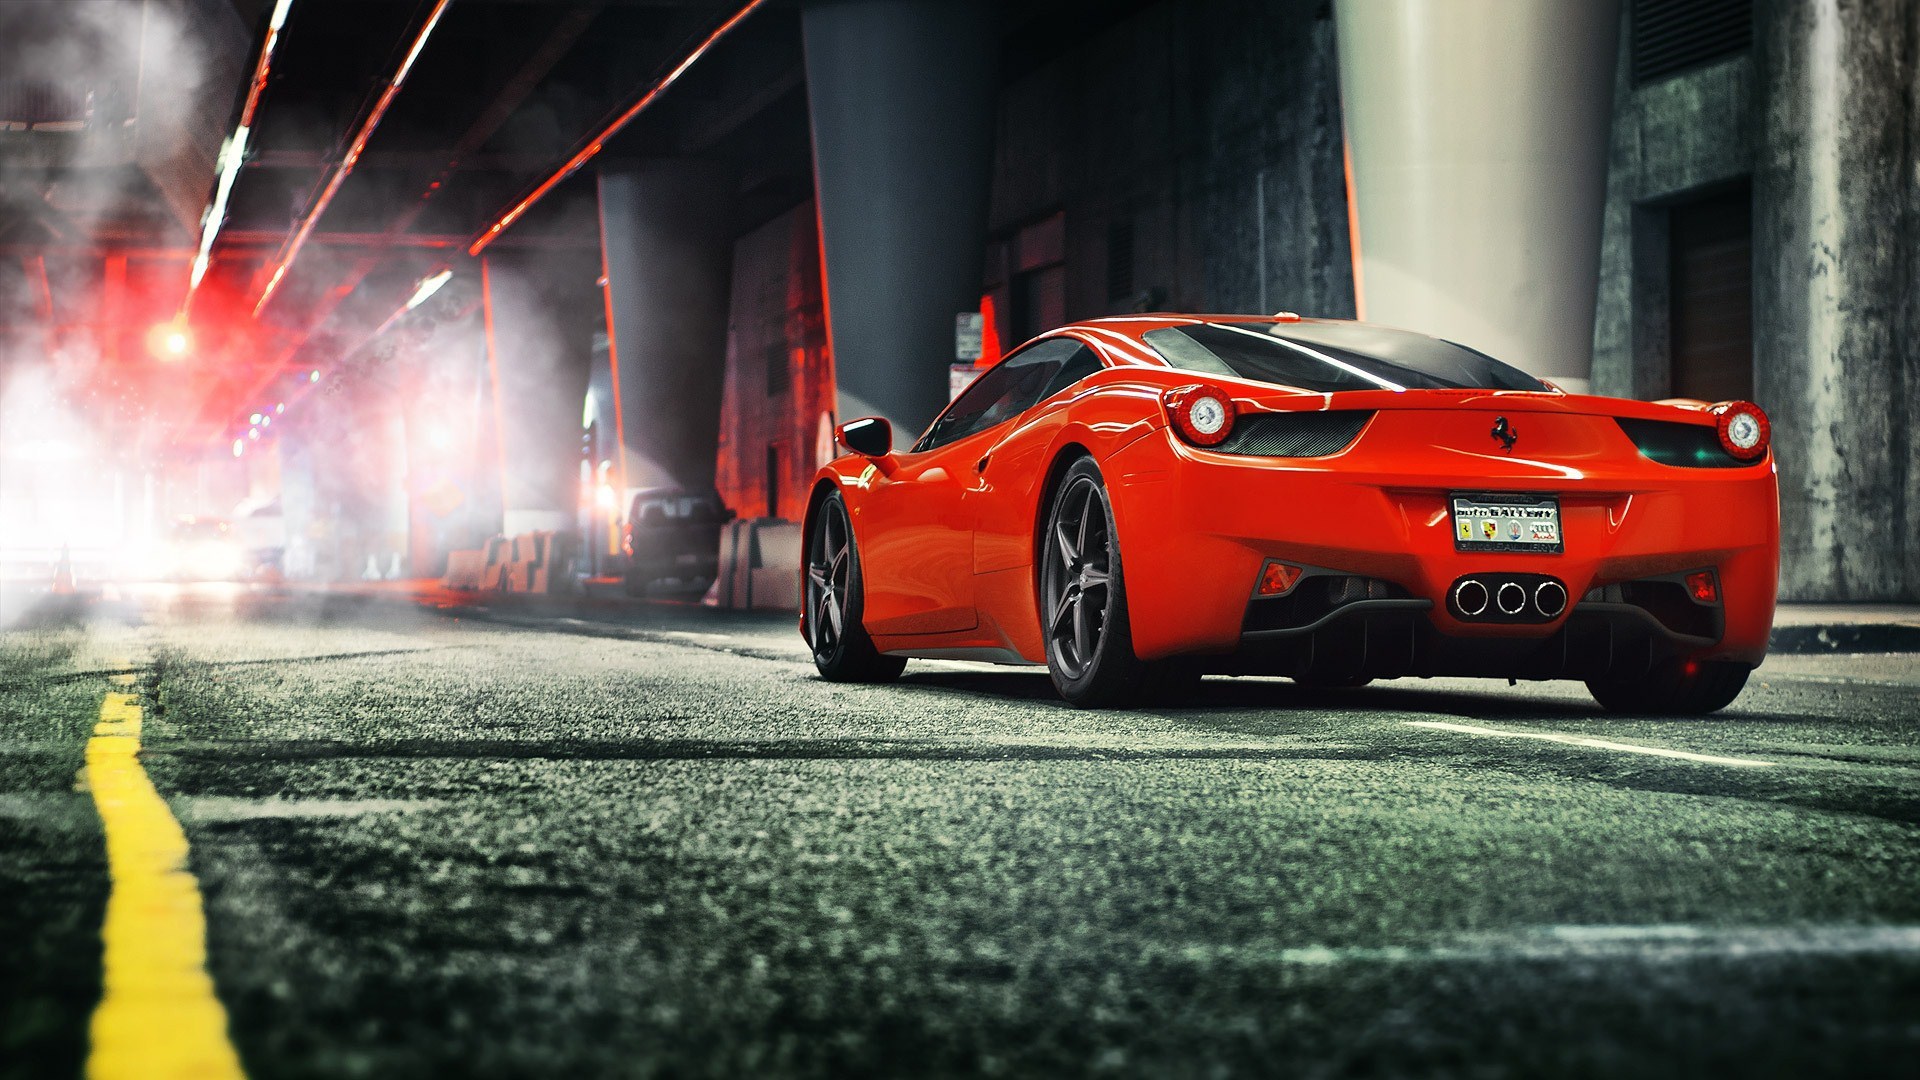 Ferrari 458 Live Background Wallpapers HD Wallpapers   GsFDcY 1920x1080